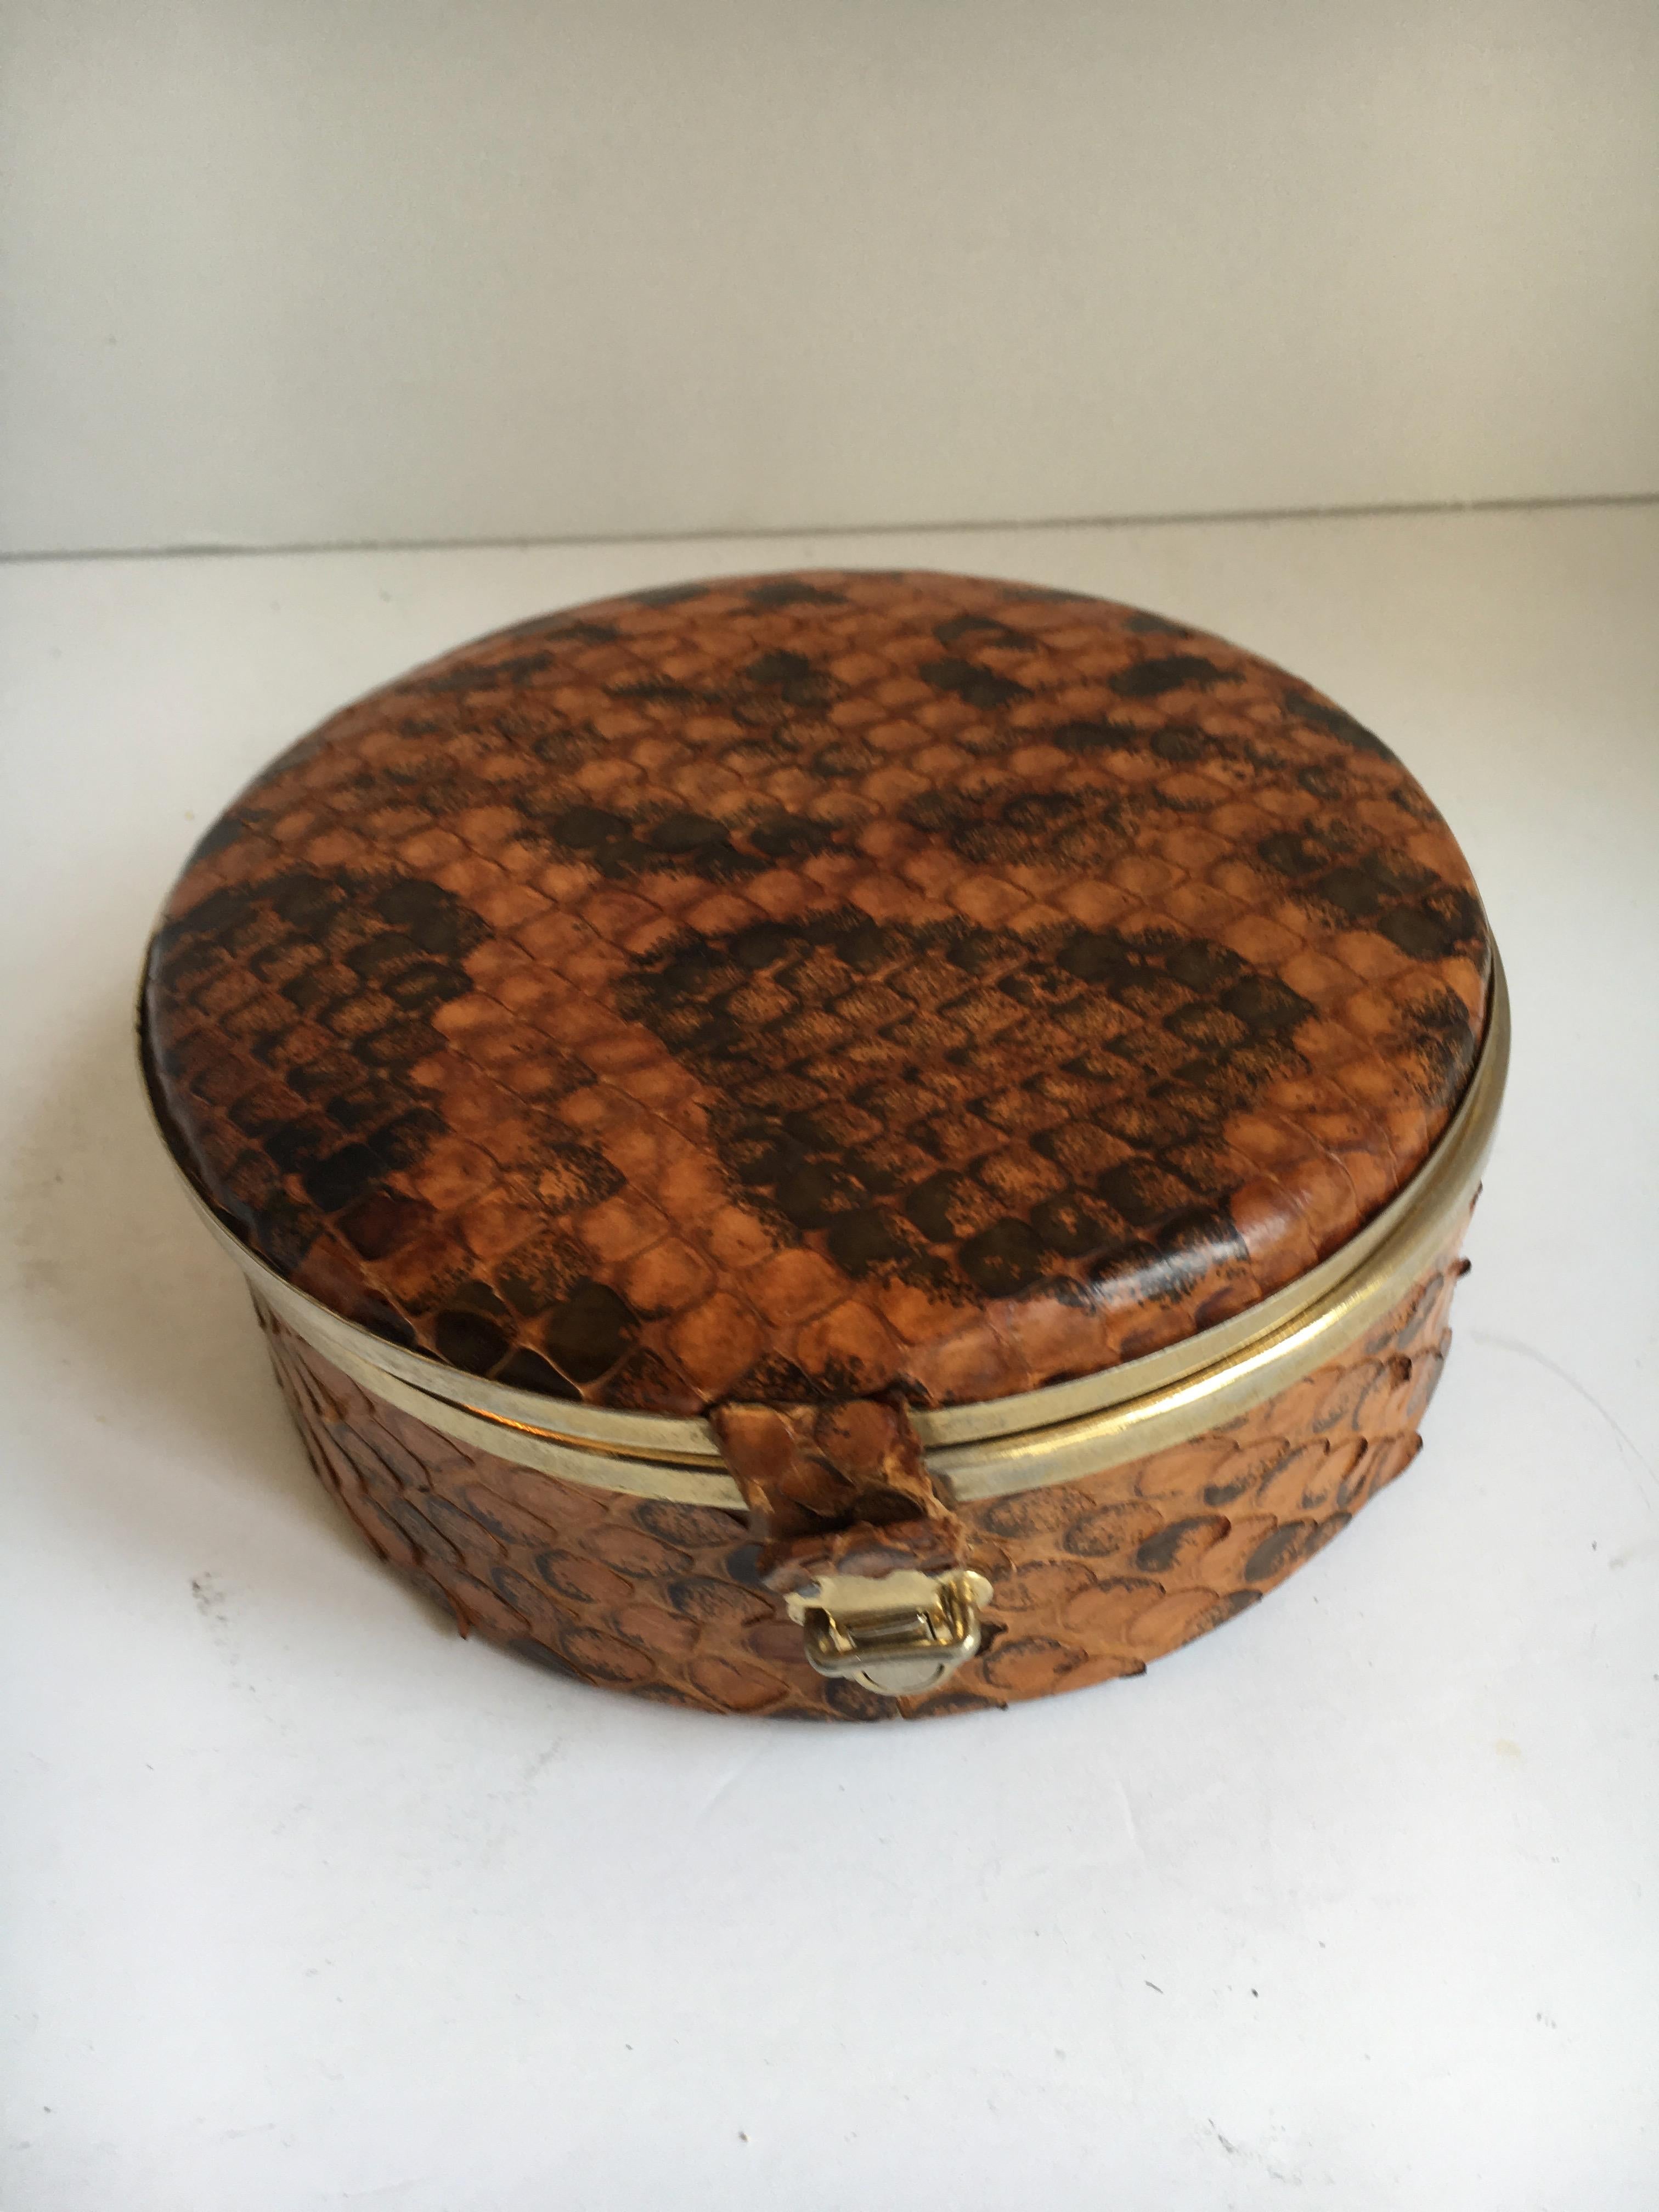 Round snakeskin box with brass detail and closure - a very handsome box of real snakeskin - well made and ready for any shelf or office space - store old letter, jewelry or 420 in this box - a lovely addition to any room with style, adding a